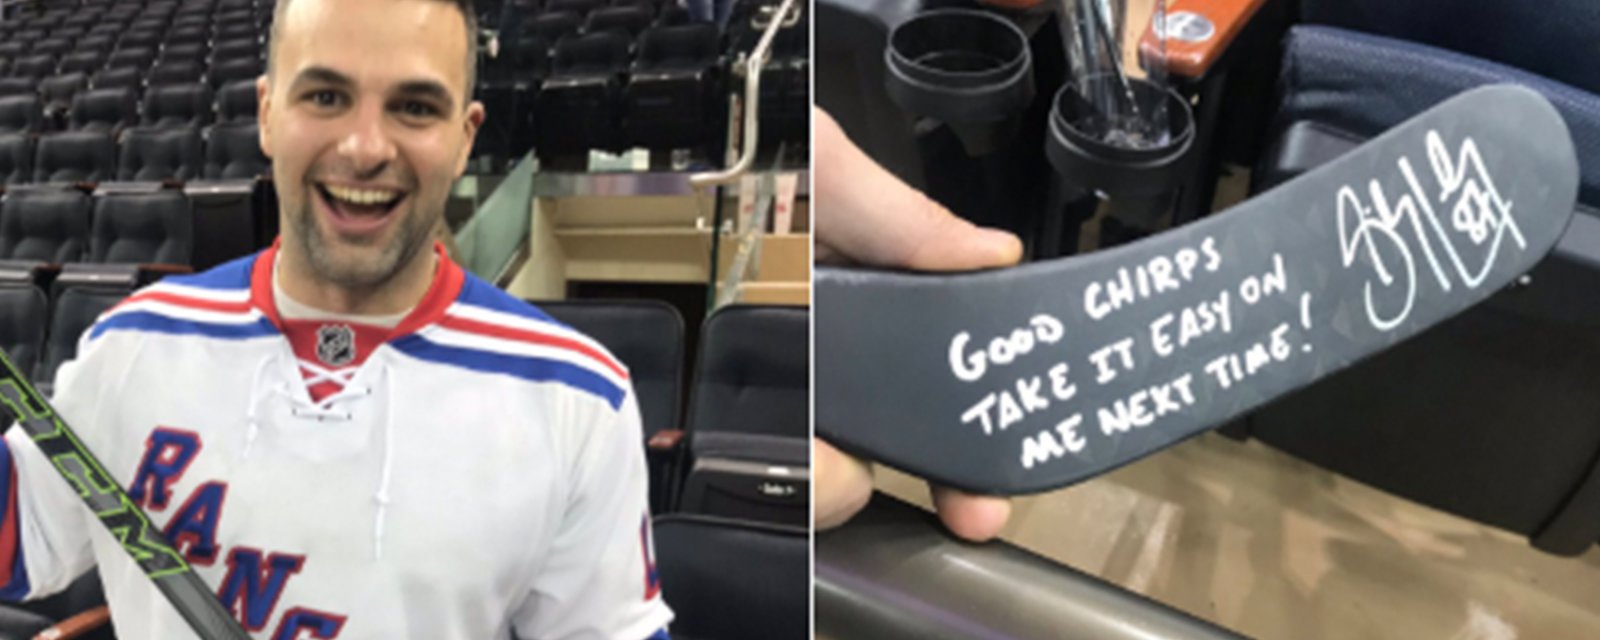 Rangers fan who received signed stick from Crosby shares his story and some of his best chirps